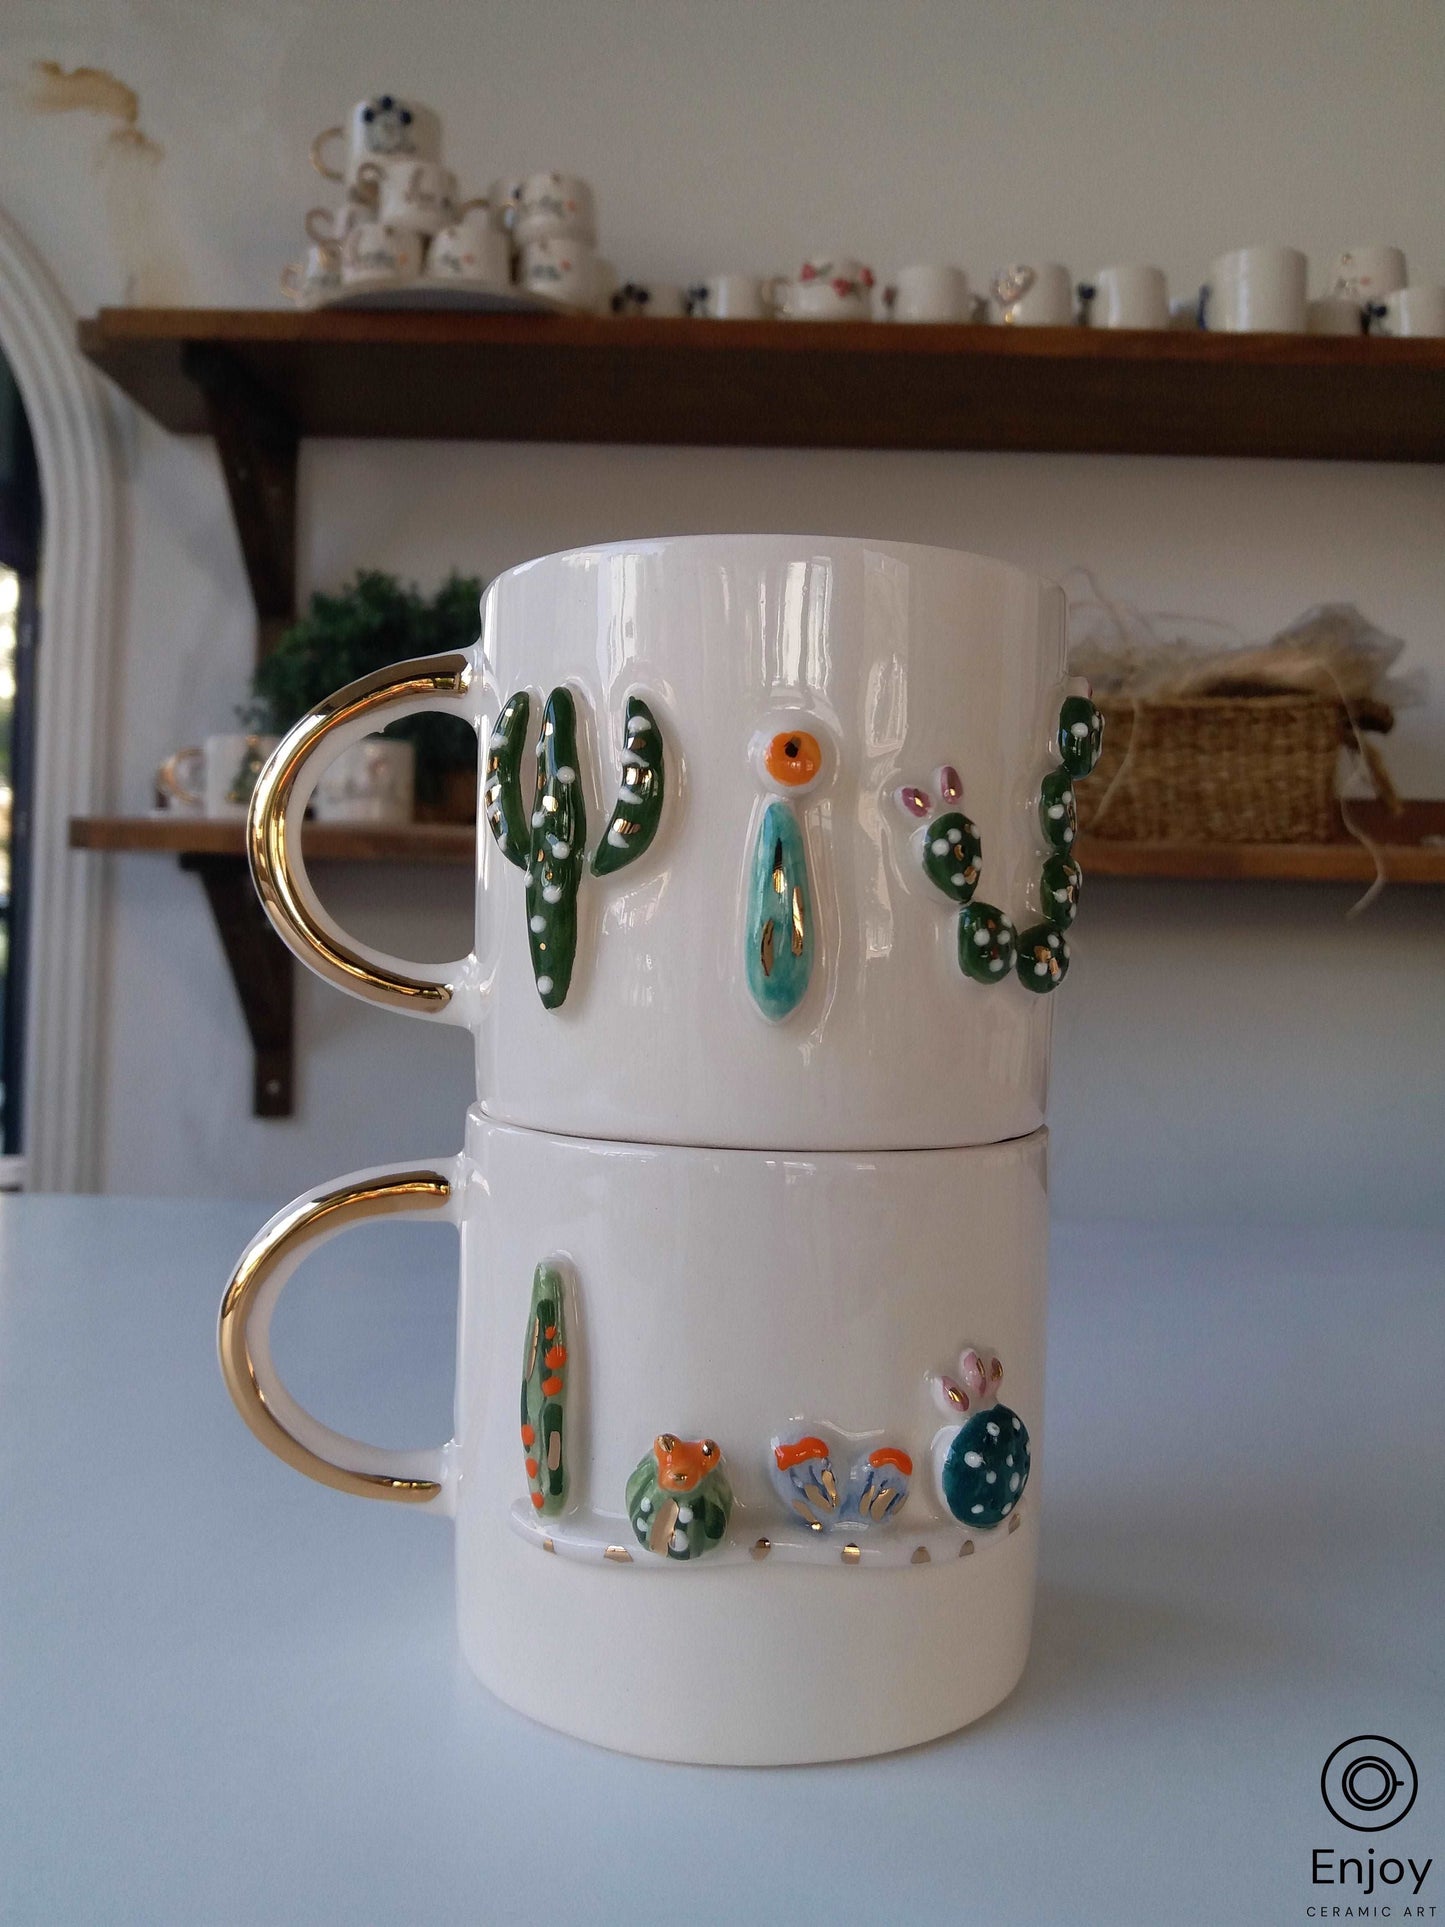 Stacked ceramic mugs with cactus designs and gold handles on a shelf.